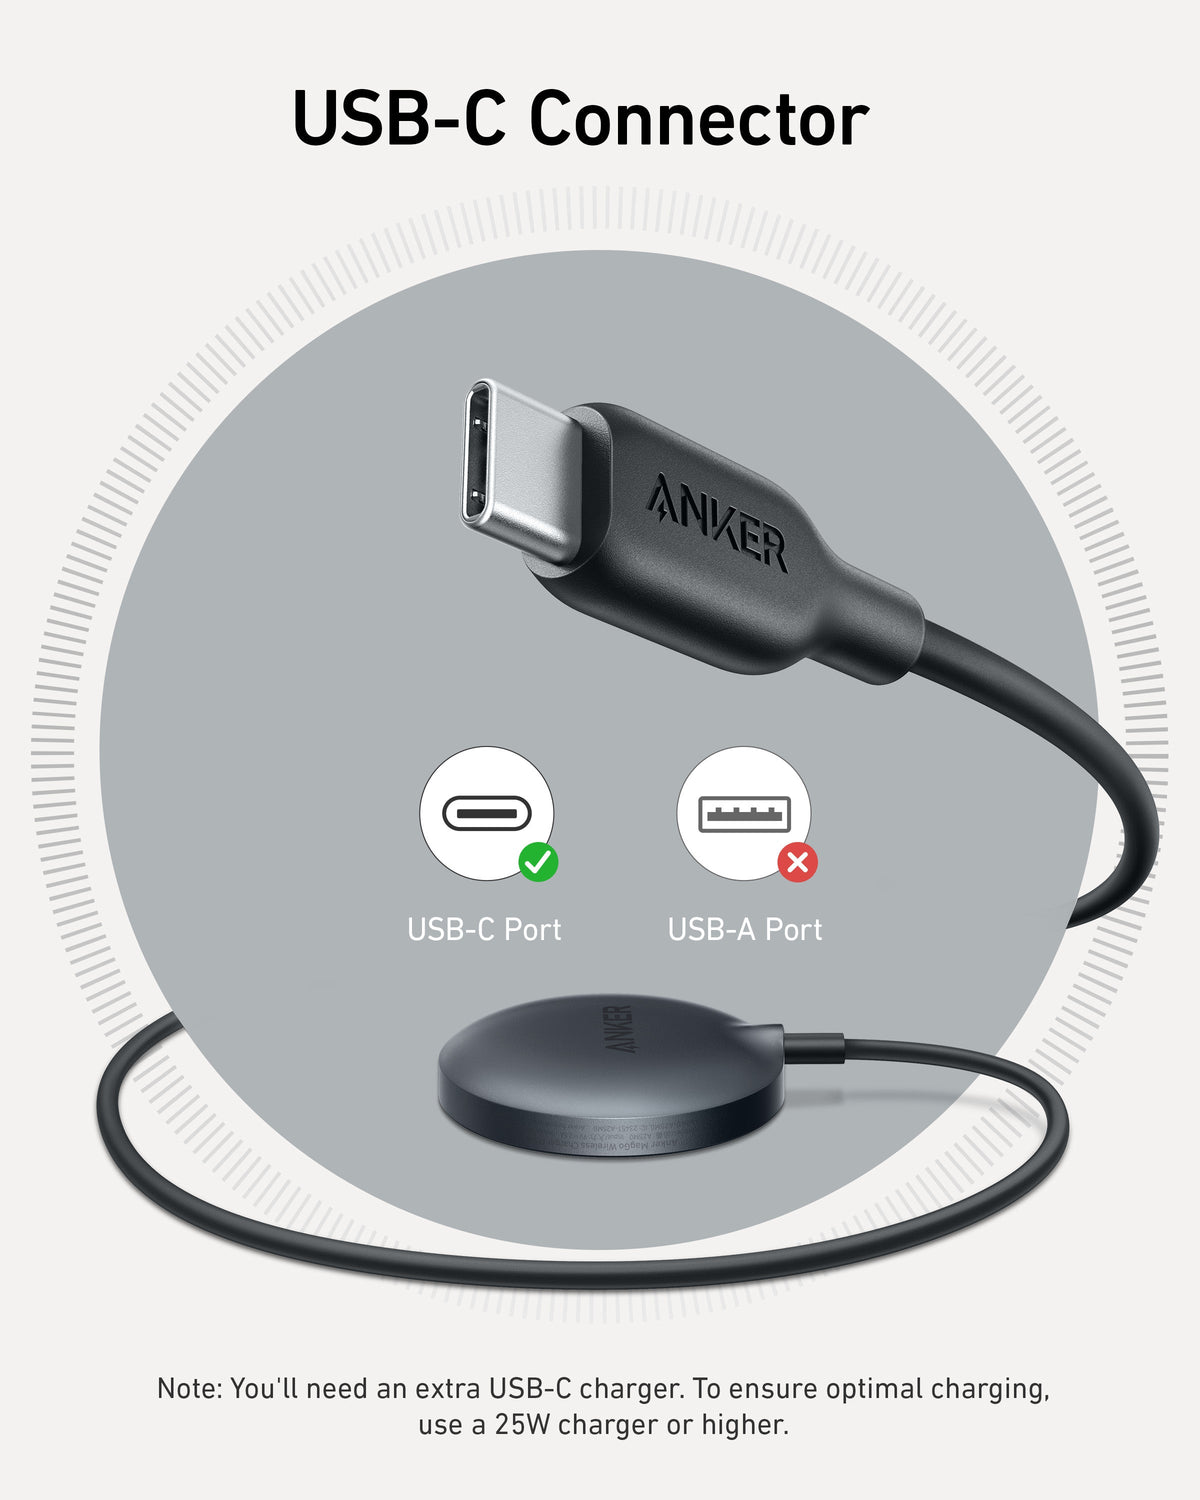 Anker MagGo Wireless Charger (Pad)